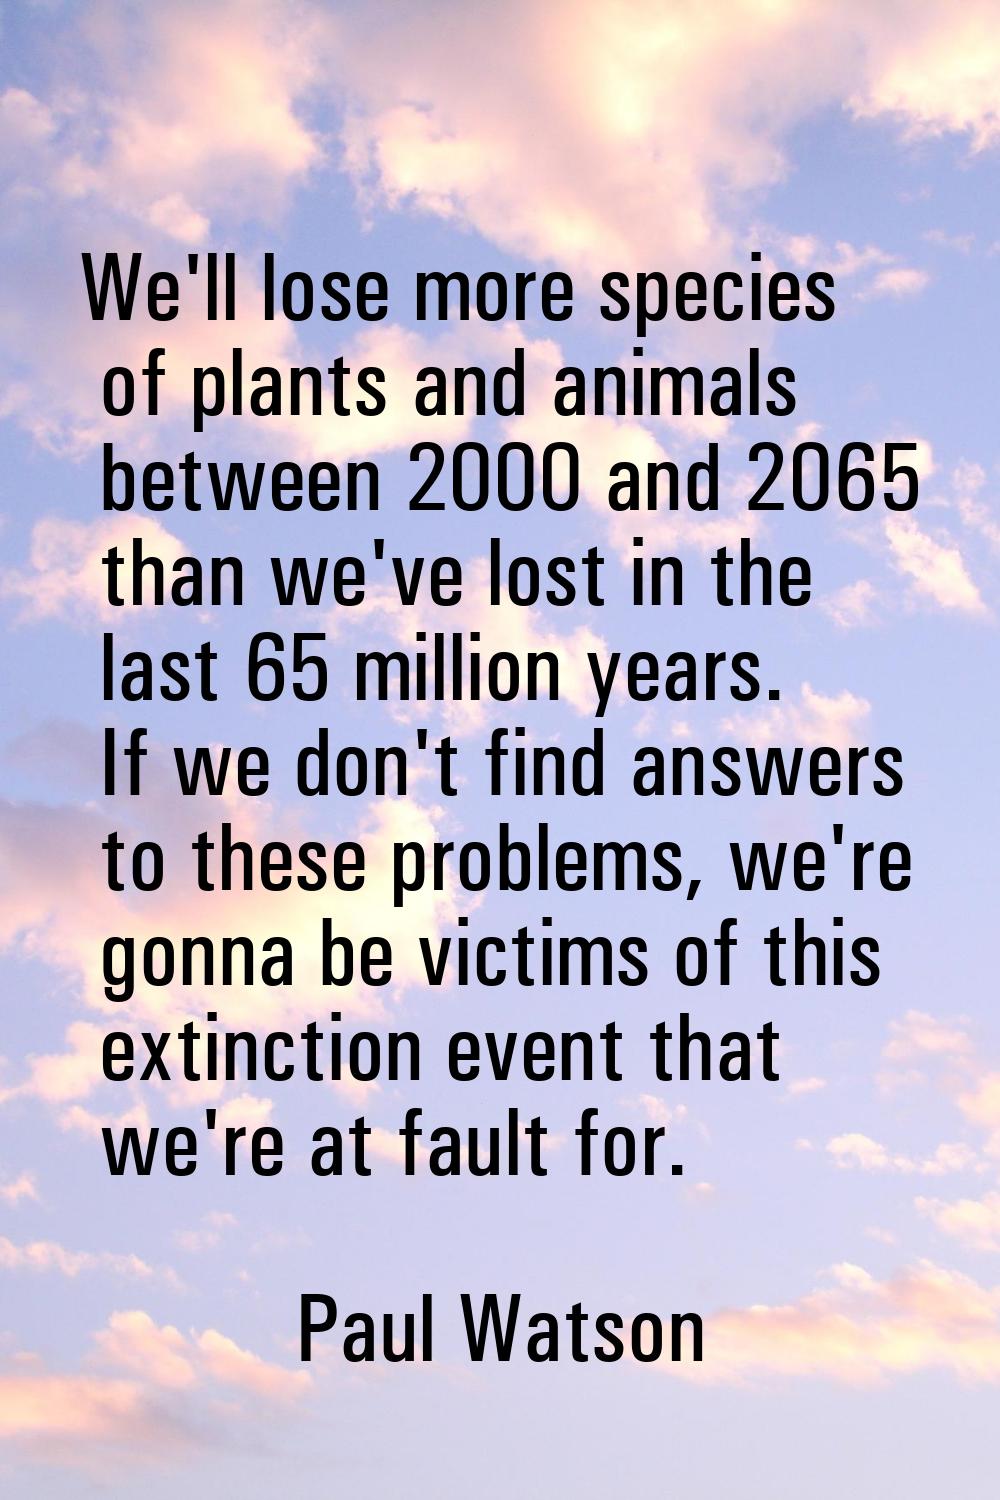 We'll lose more species of plants and animals between 2000 and 2065 than we've lost in the last 65 